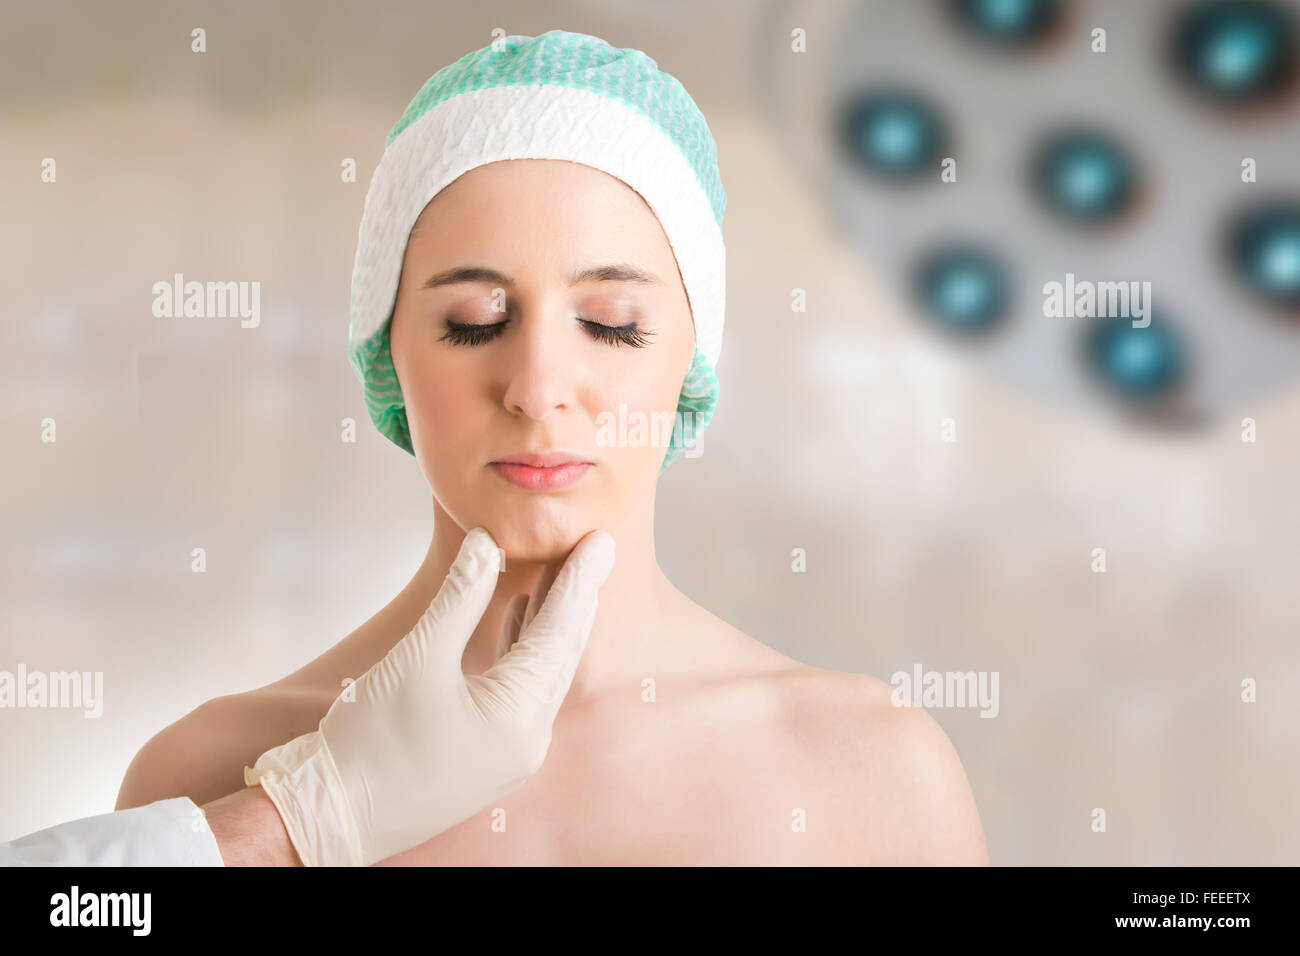 Woman ready for cosmetic surgery in her face Stock Photo